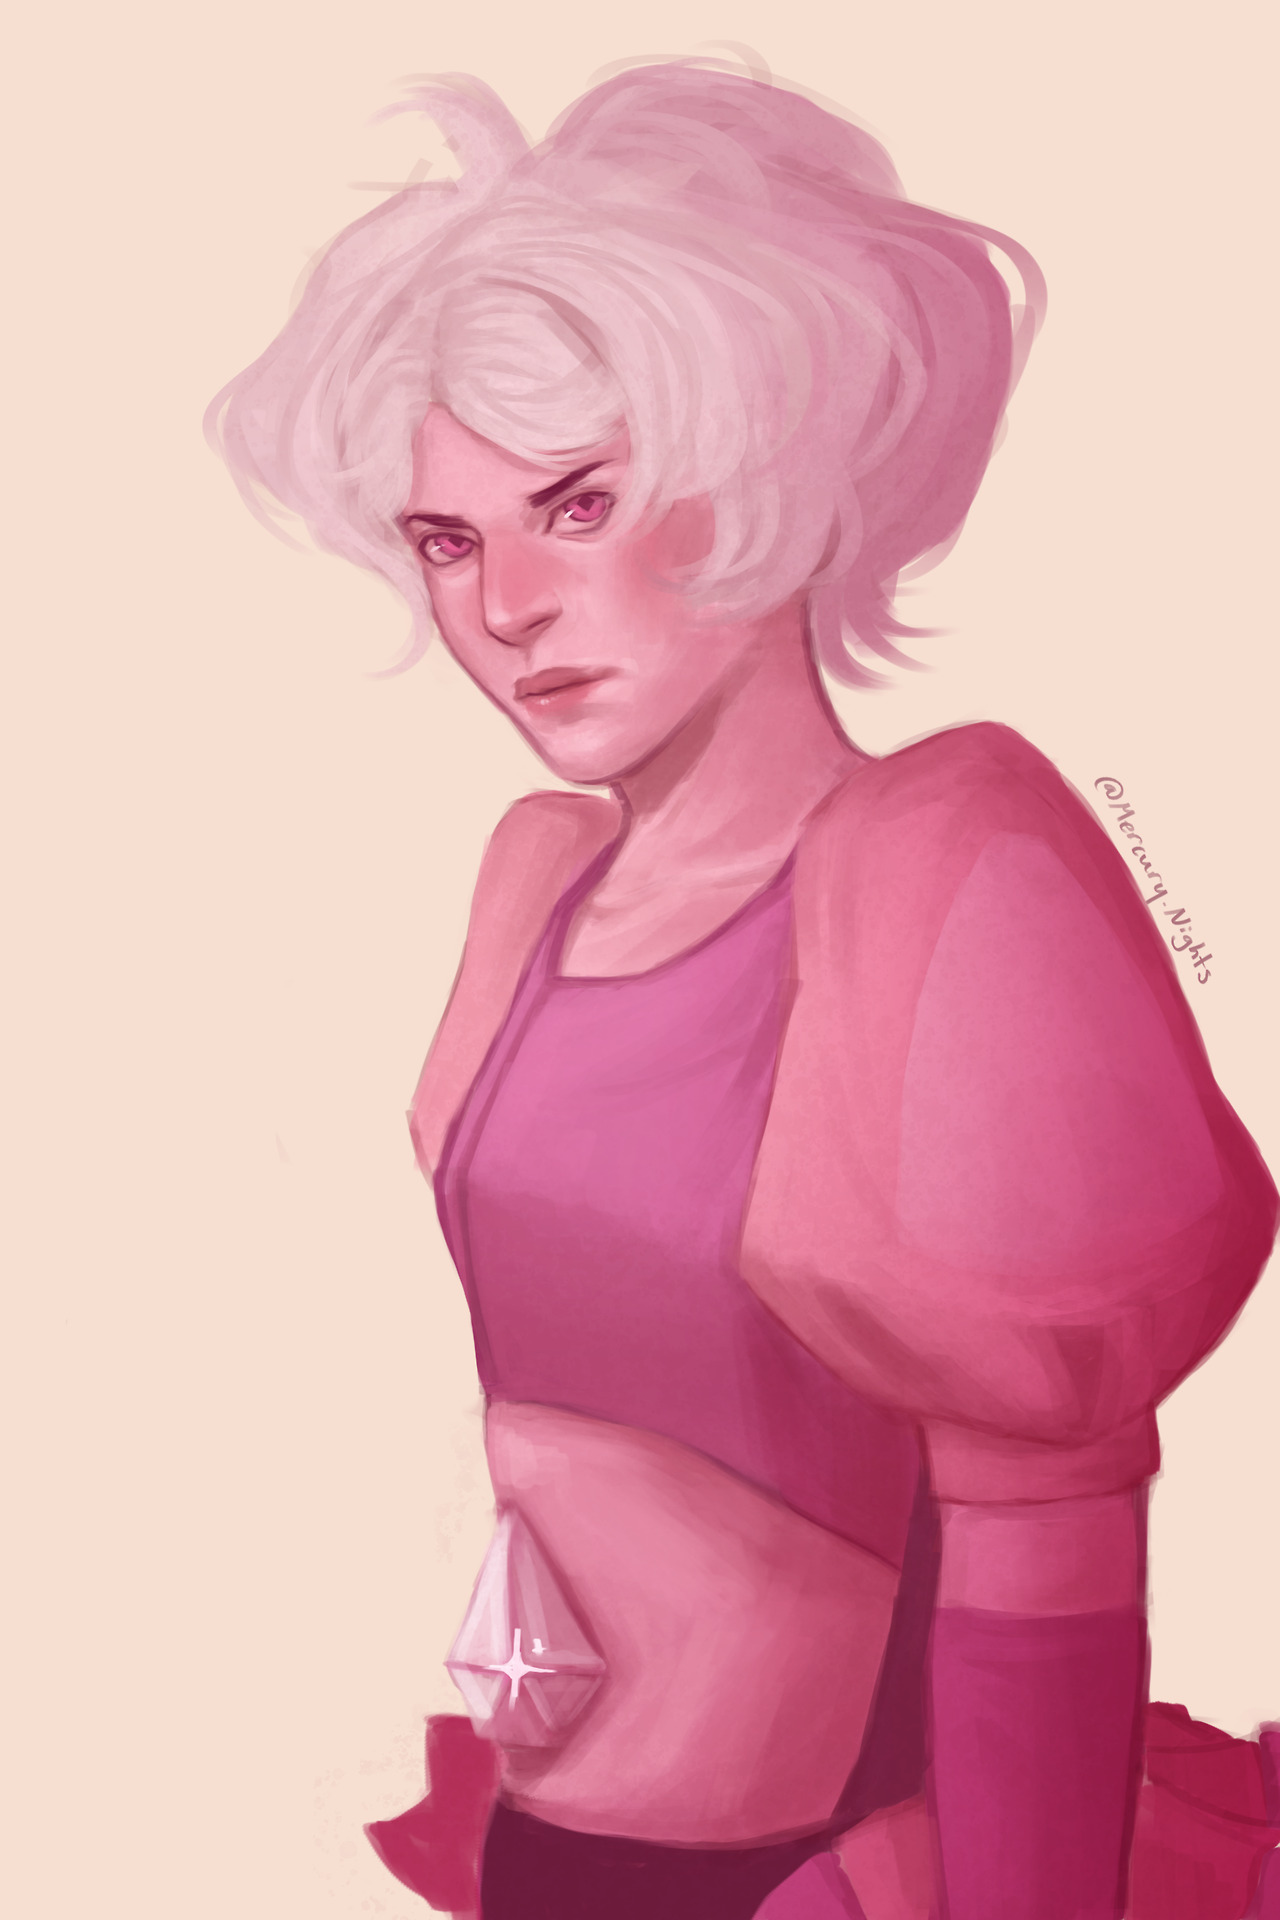 I’m uploading here now, so have a bratty pink rock